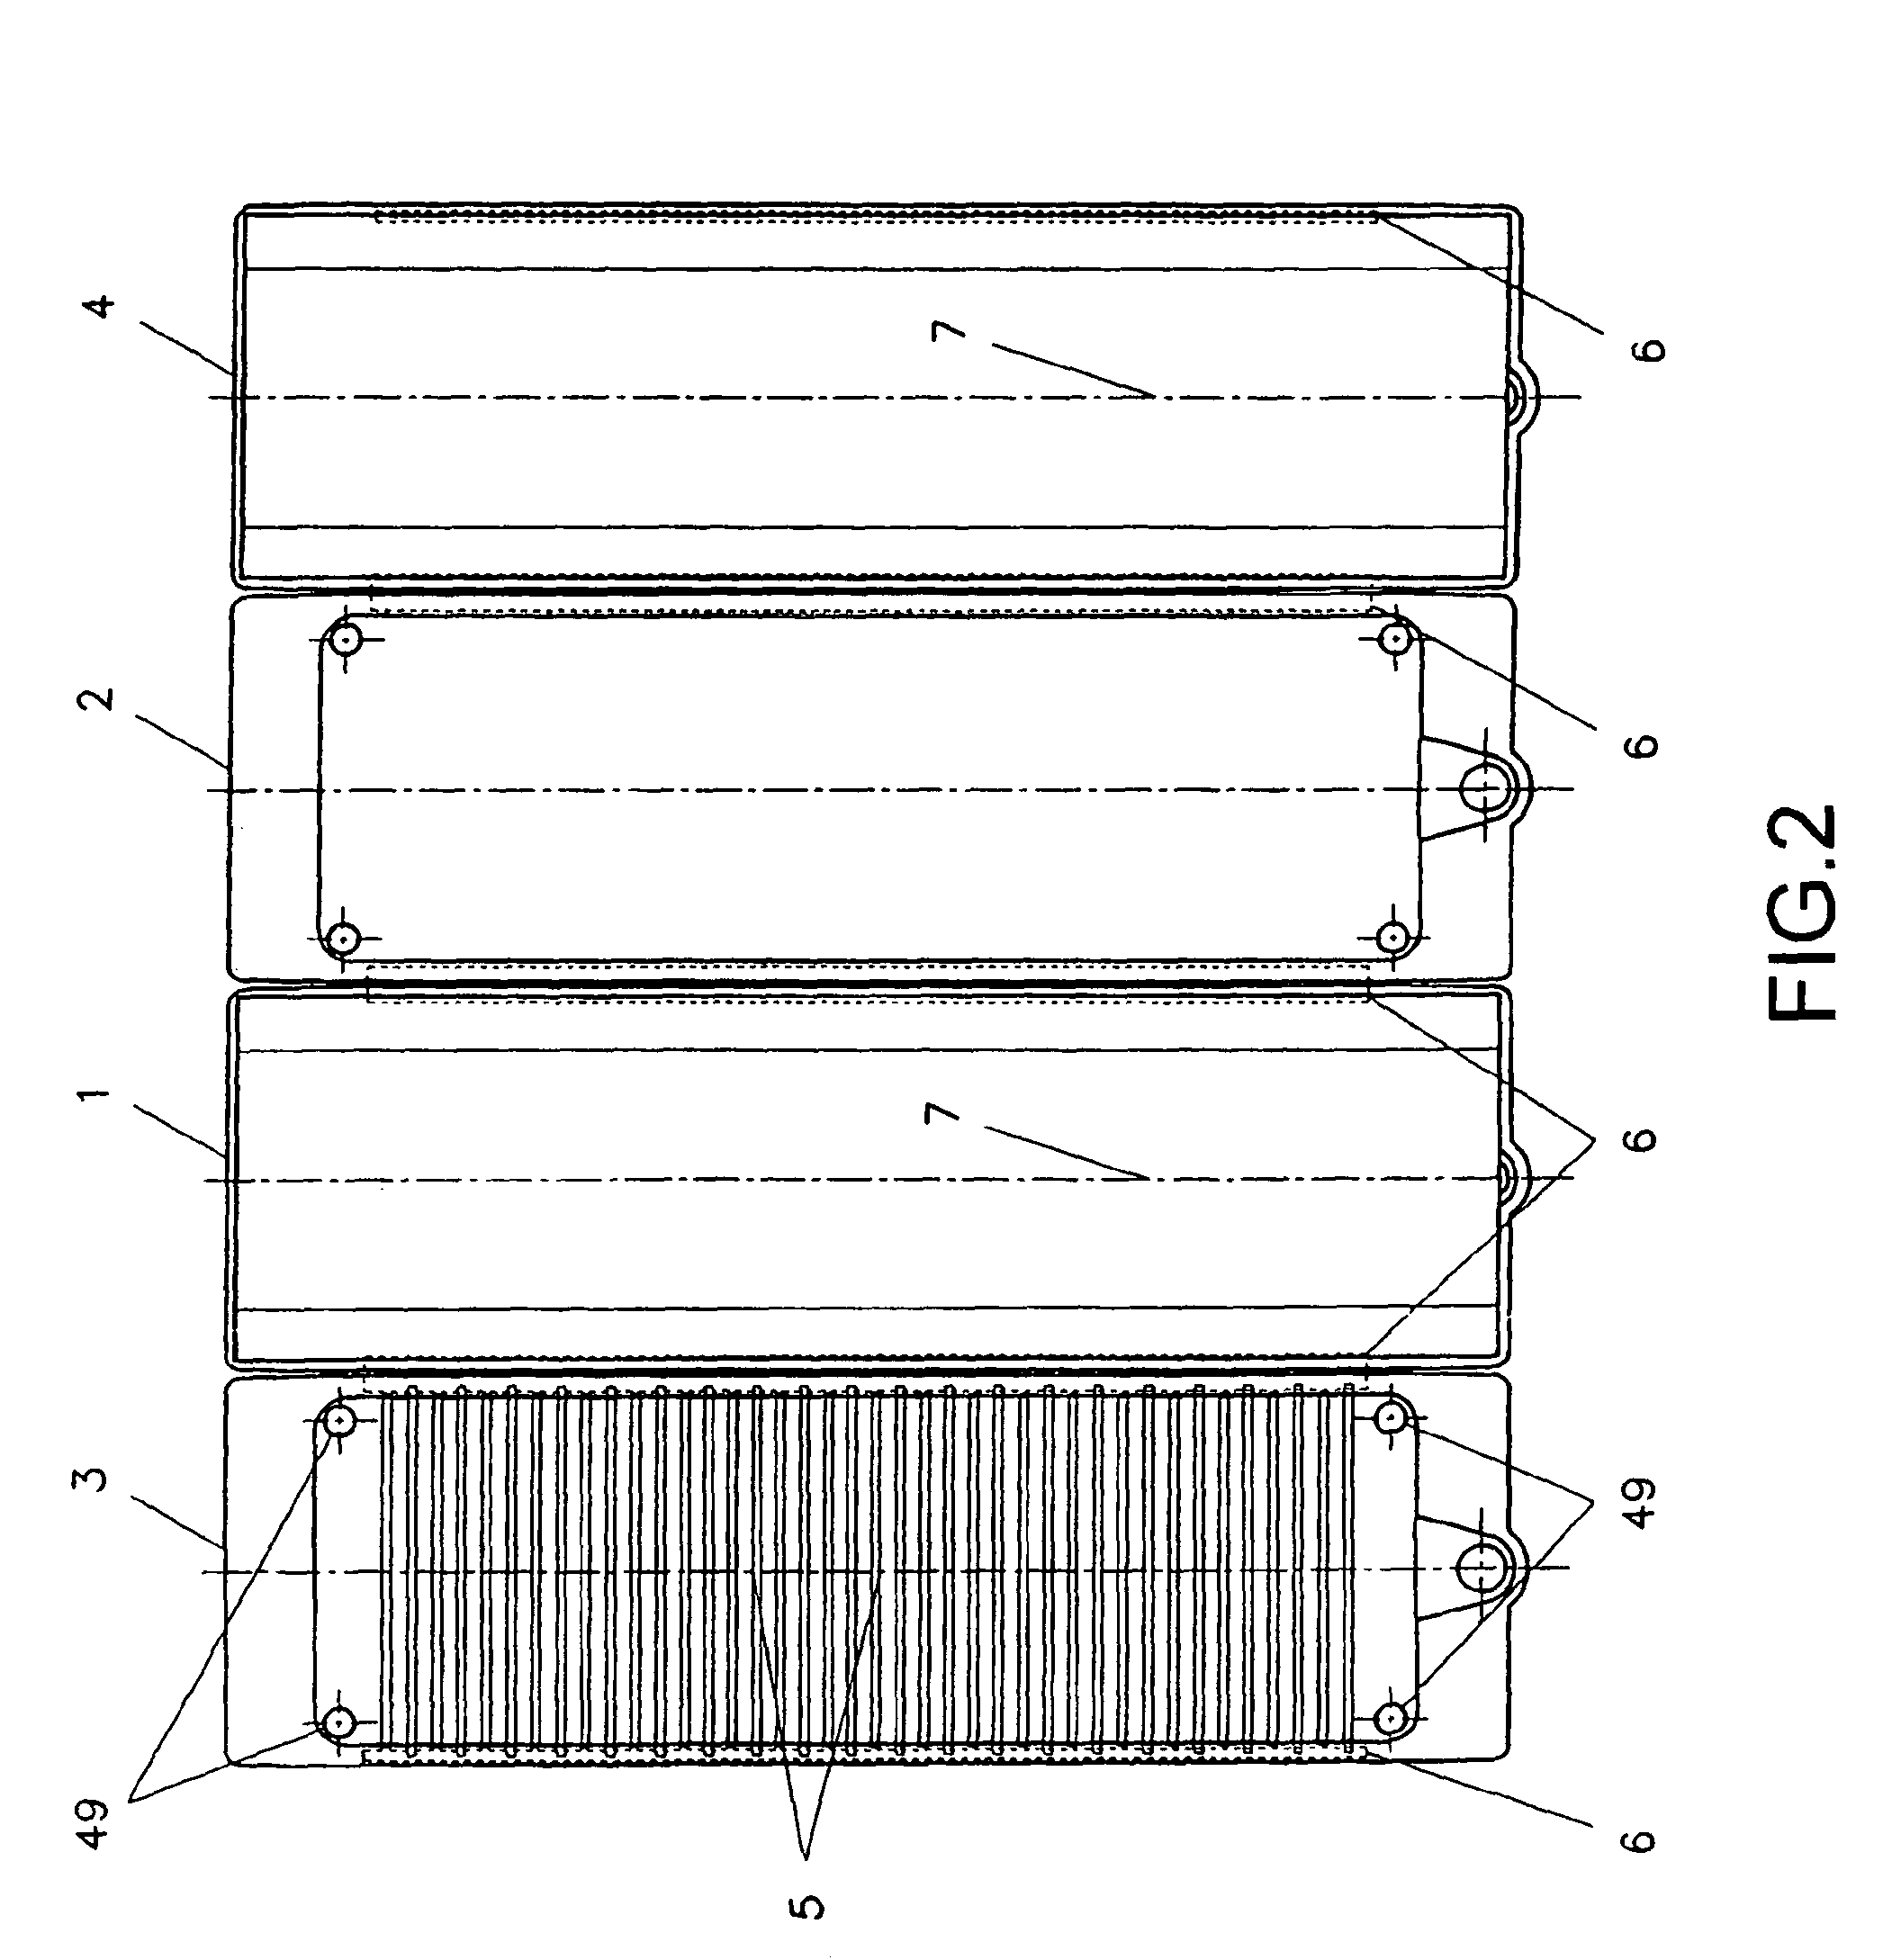 System for monitoring, control, and management of a plant where hydrometallurgical electrowinning and electrorefining processes for non ferrous metals